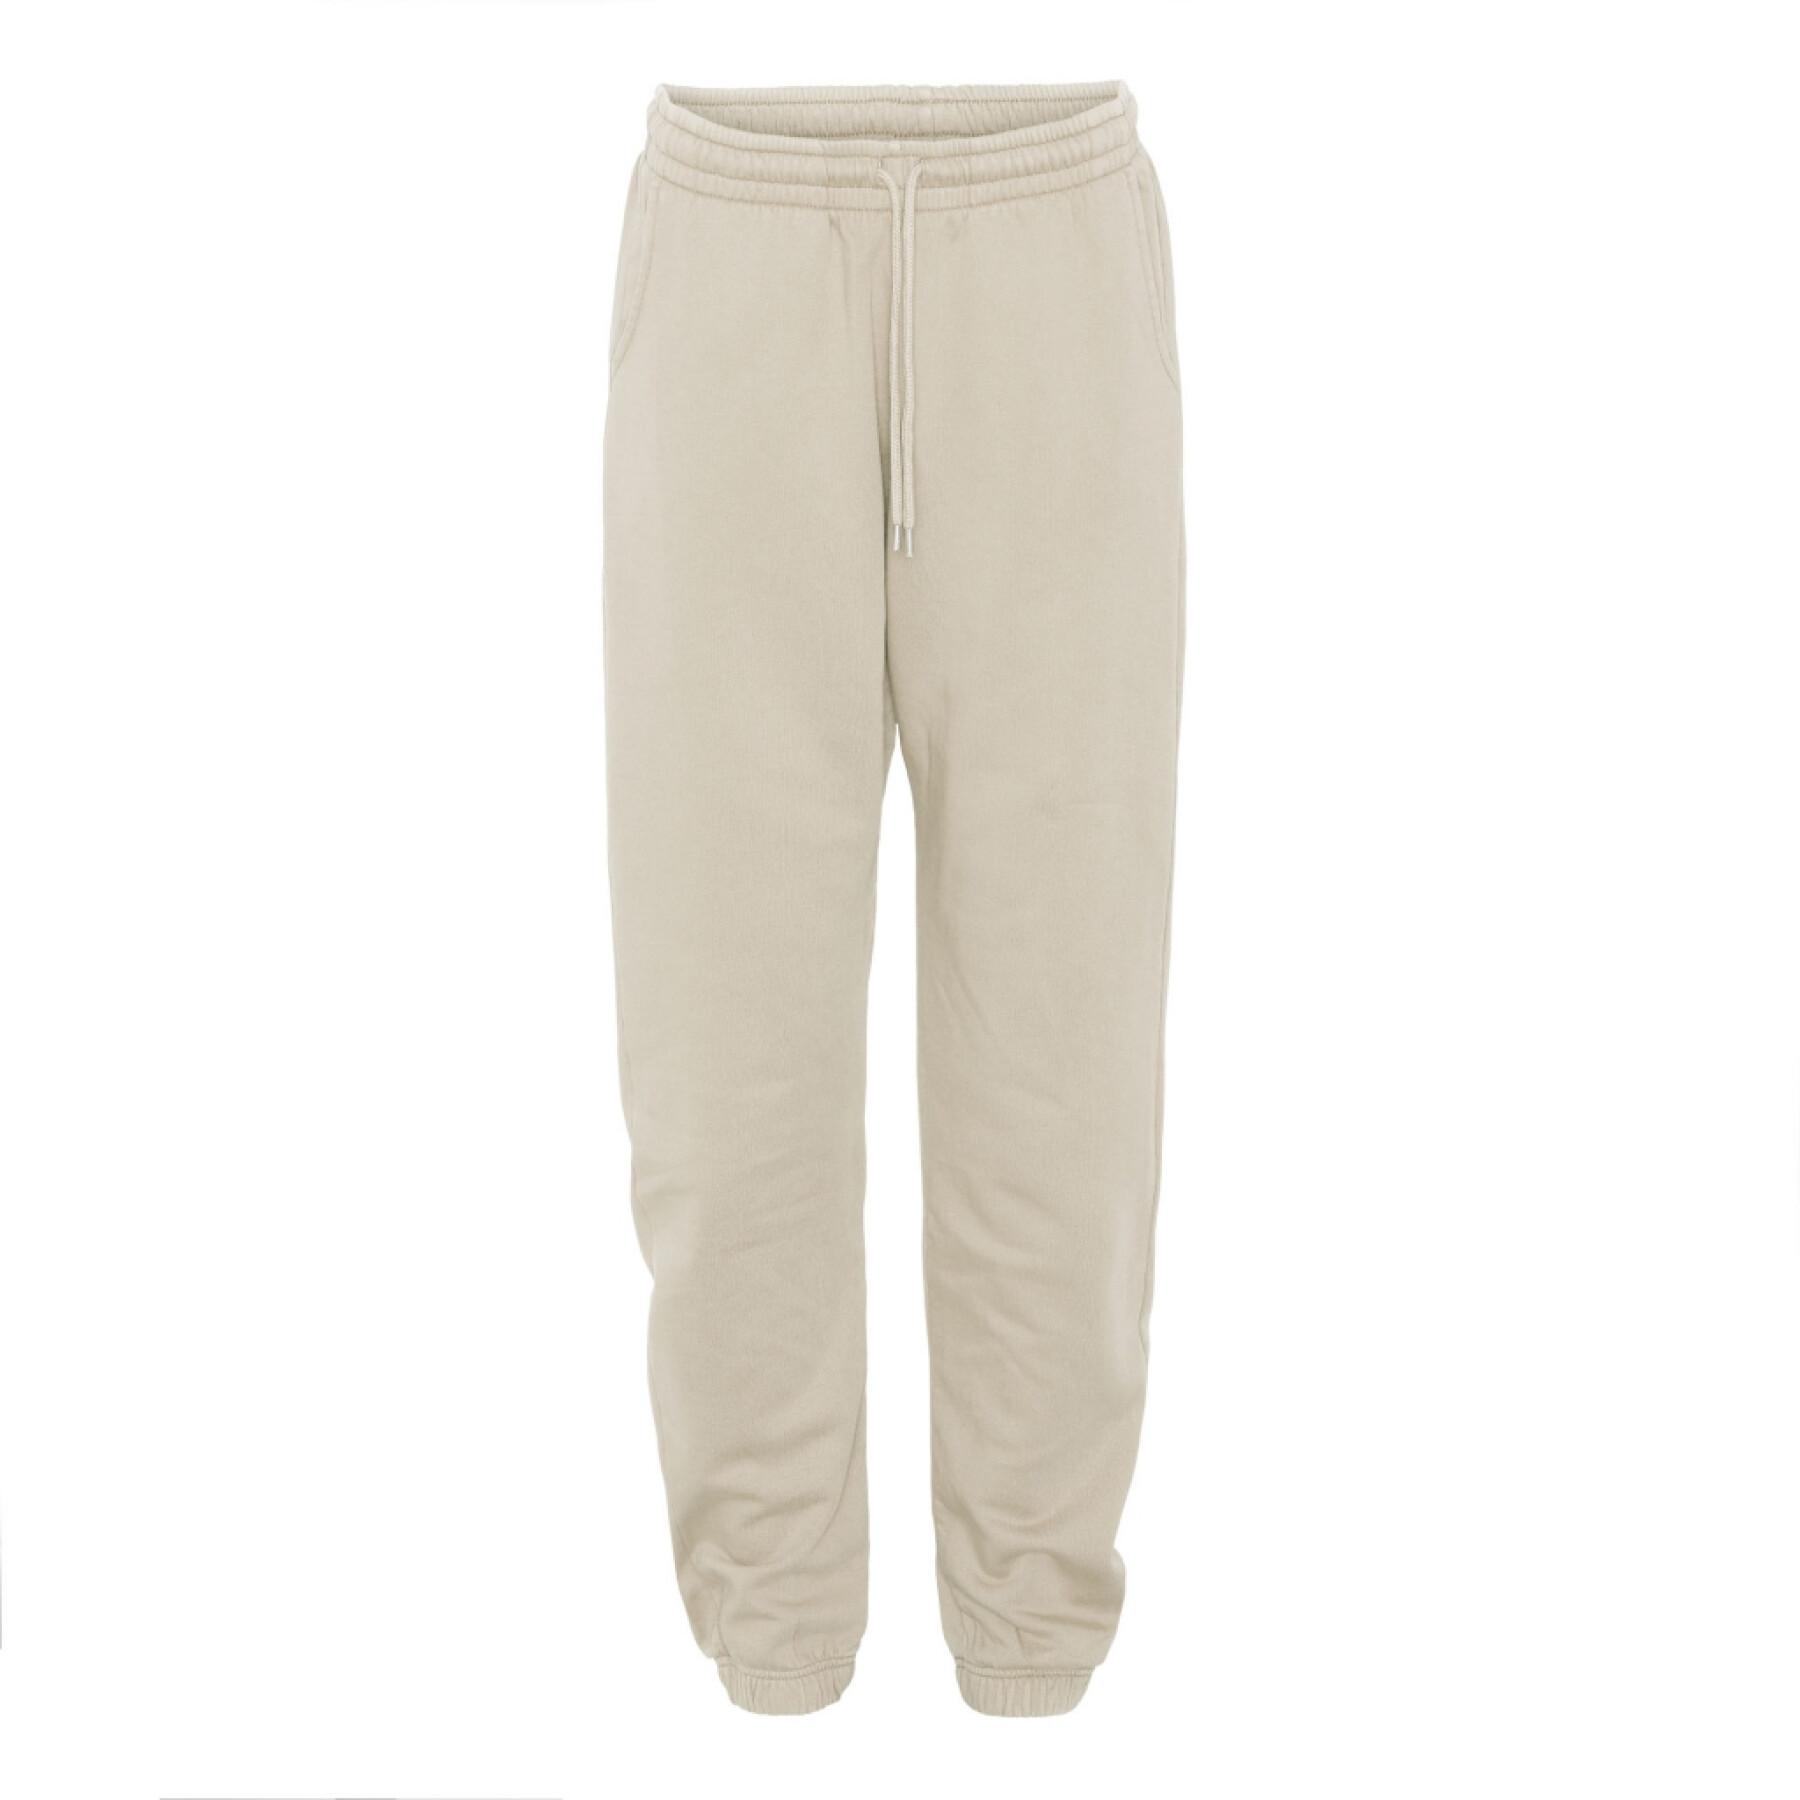 Joggers Colorful Standard Organic ivory white